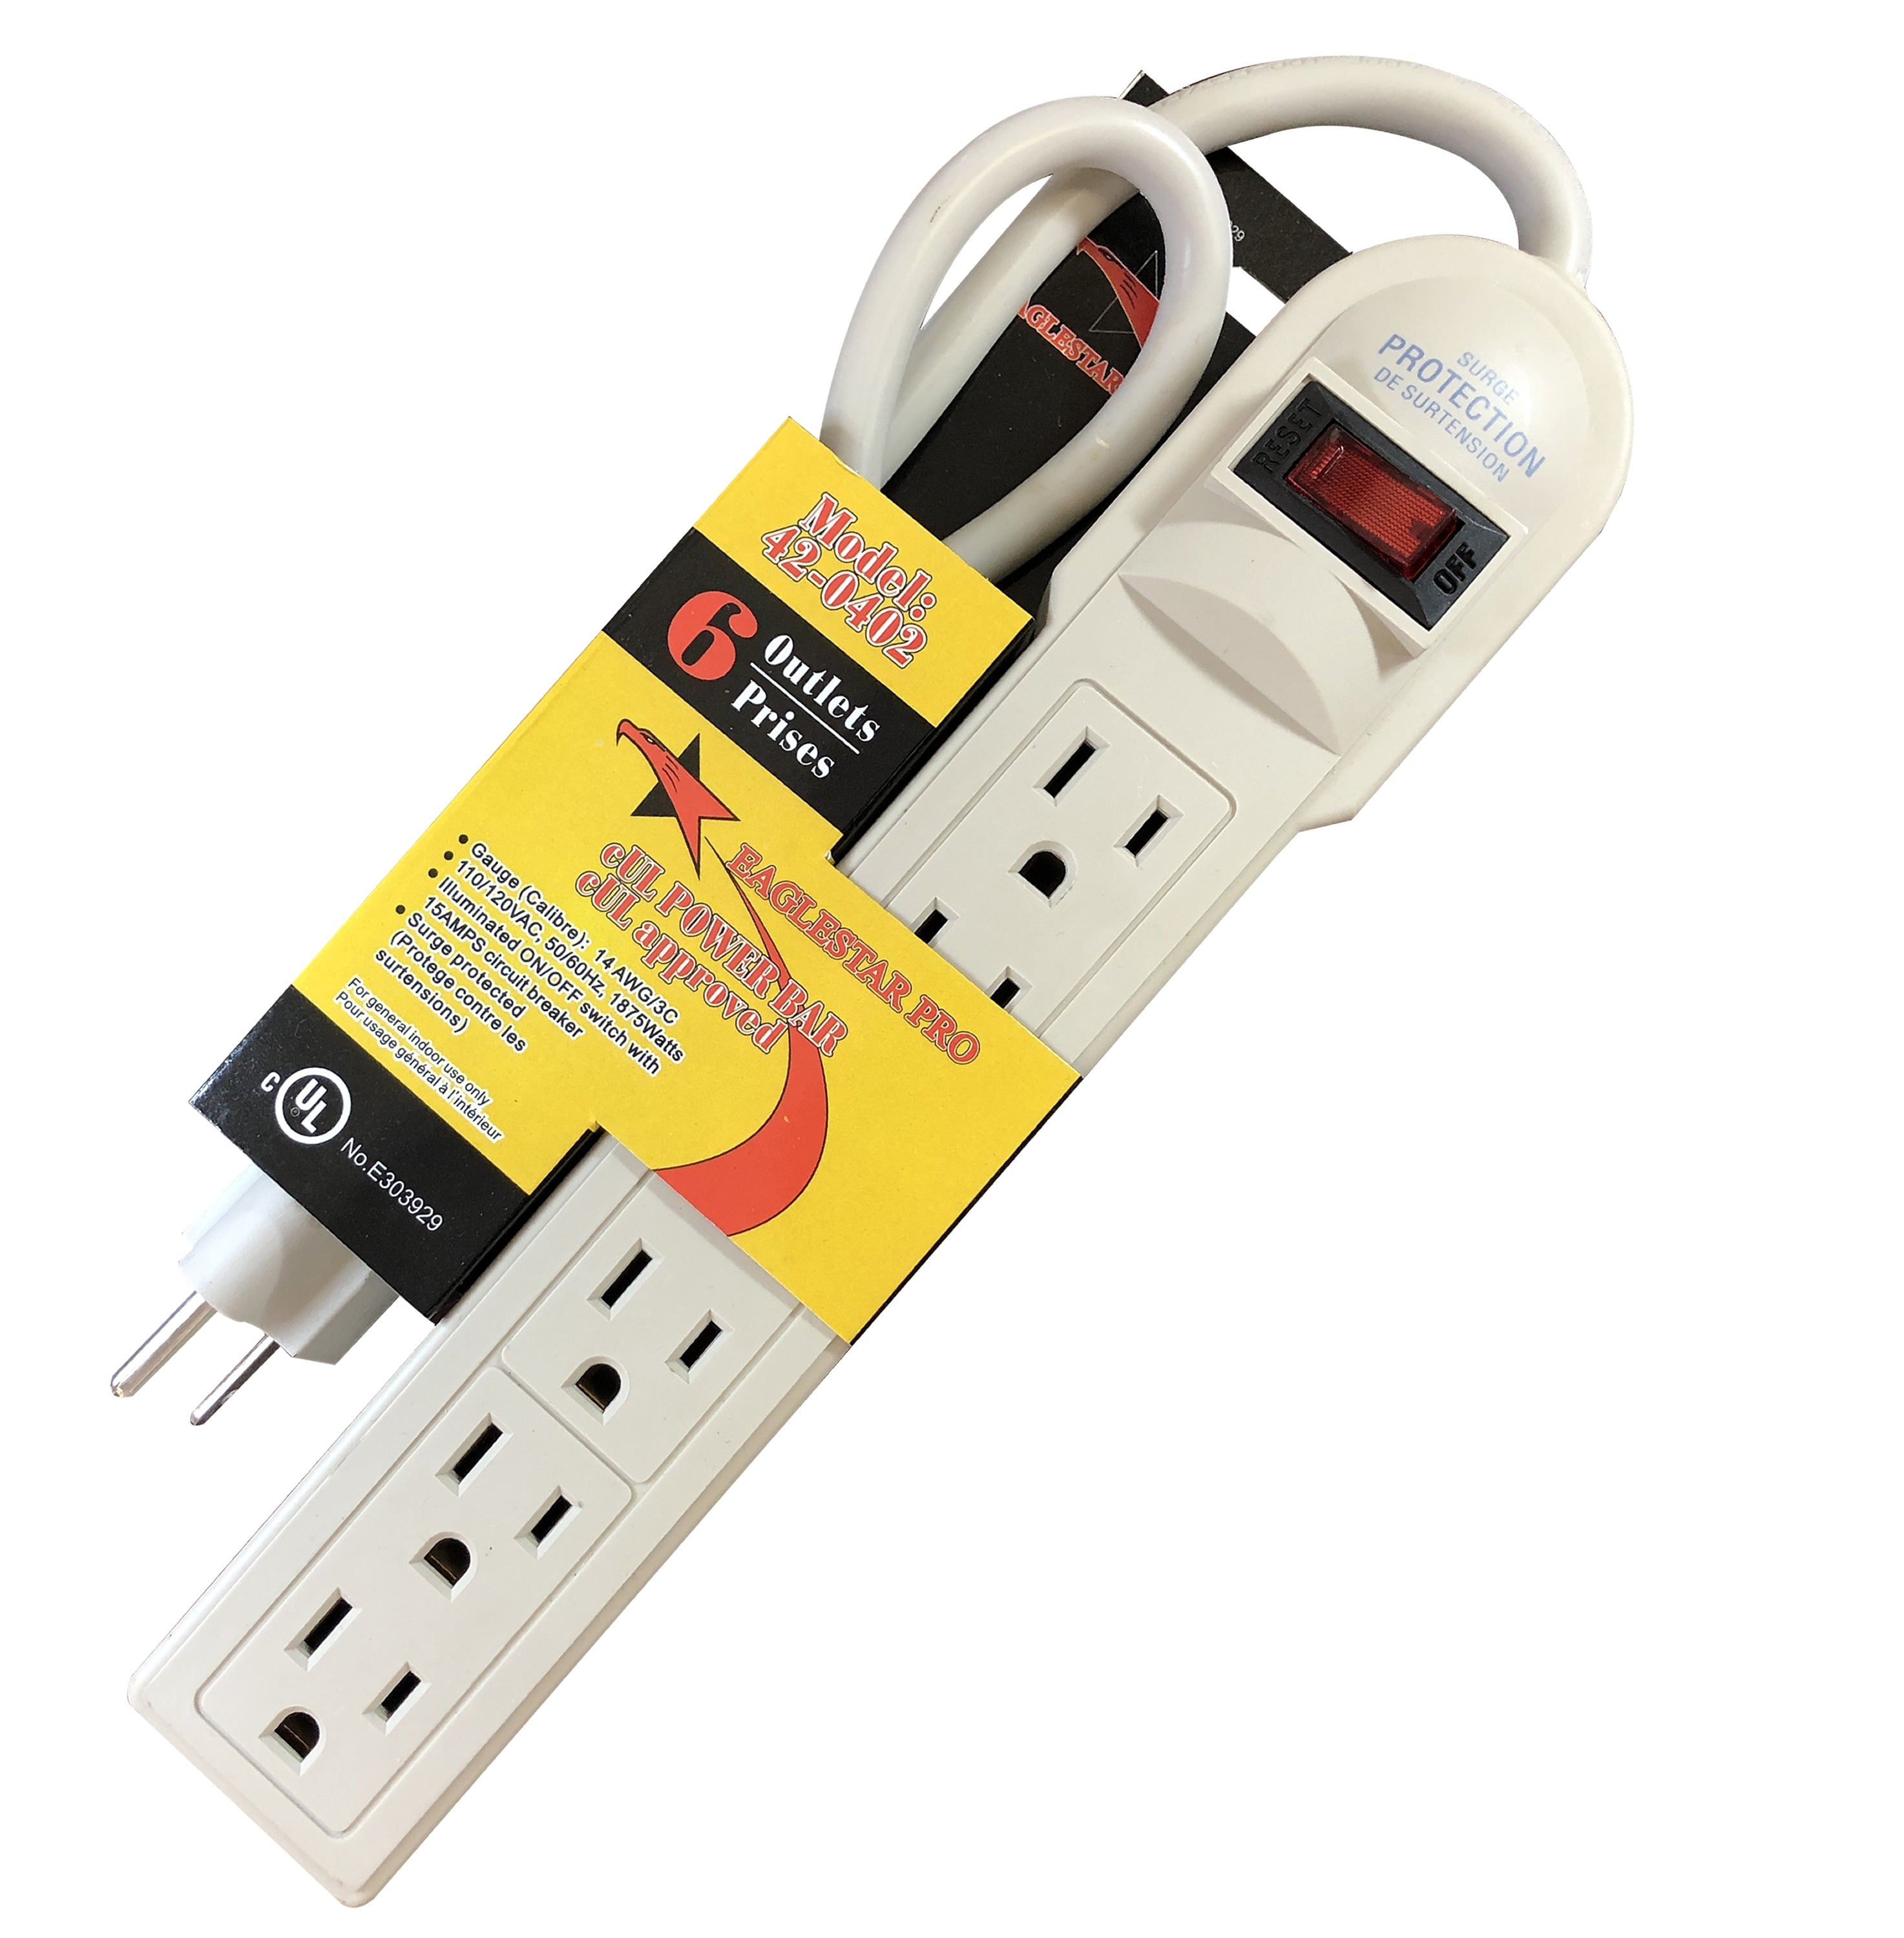 42-0402 6 Outlet Power Strip Bar with 3 ft Cord, cUL Approved, vertical power distribution